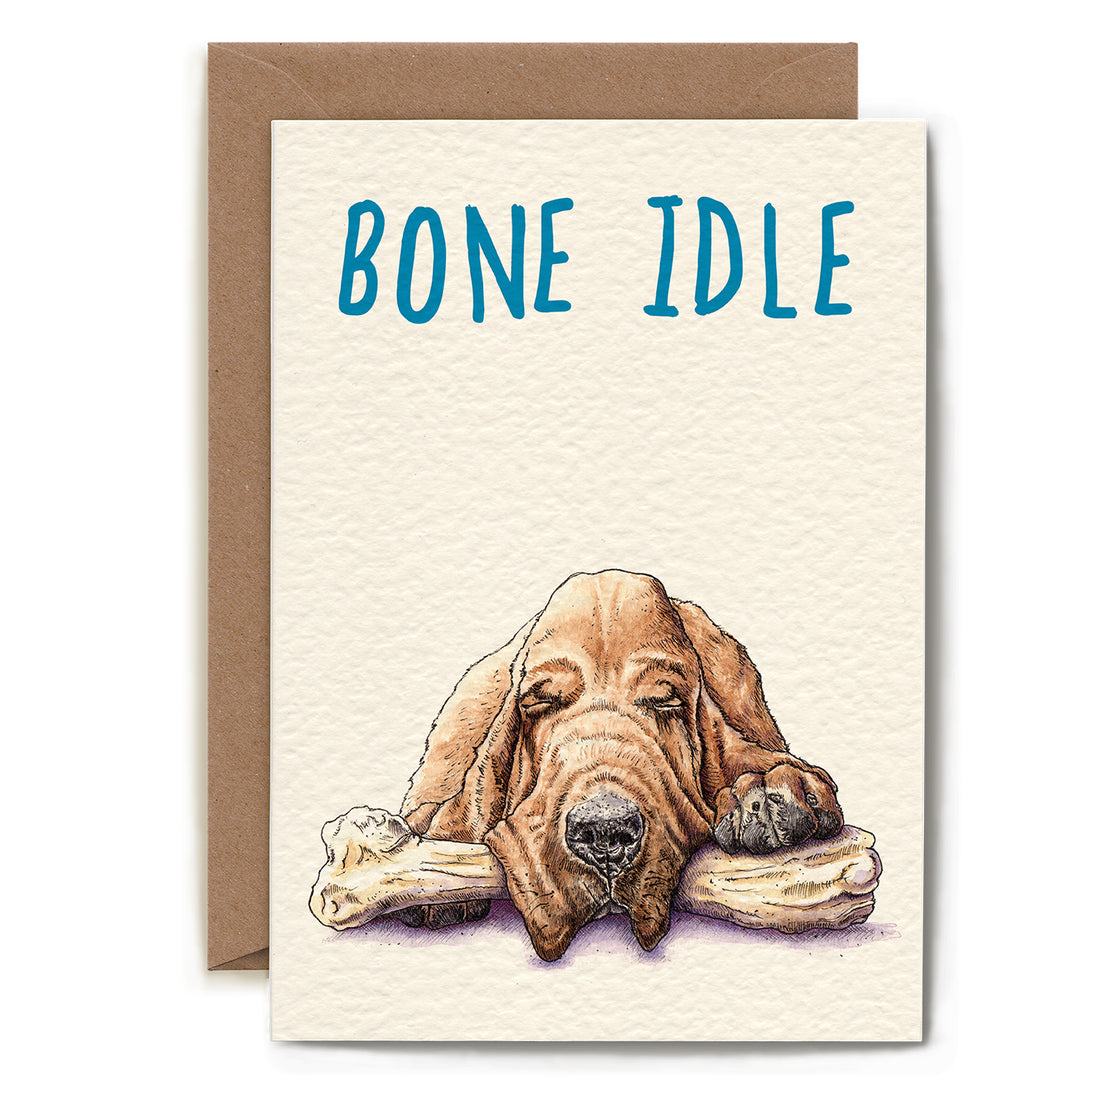 Greeting card featuring a sleeping dog with the pun &quot;bone idle&quot; written at the top, perfect stationery for your partner. Get the Bone Idle Card by Hester &amp; Cook.